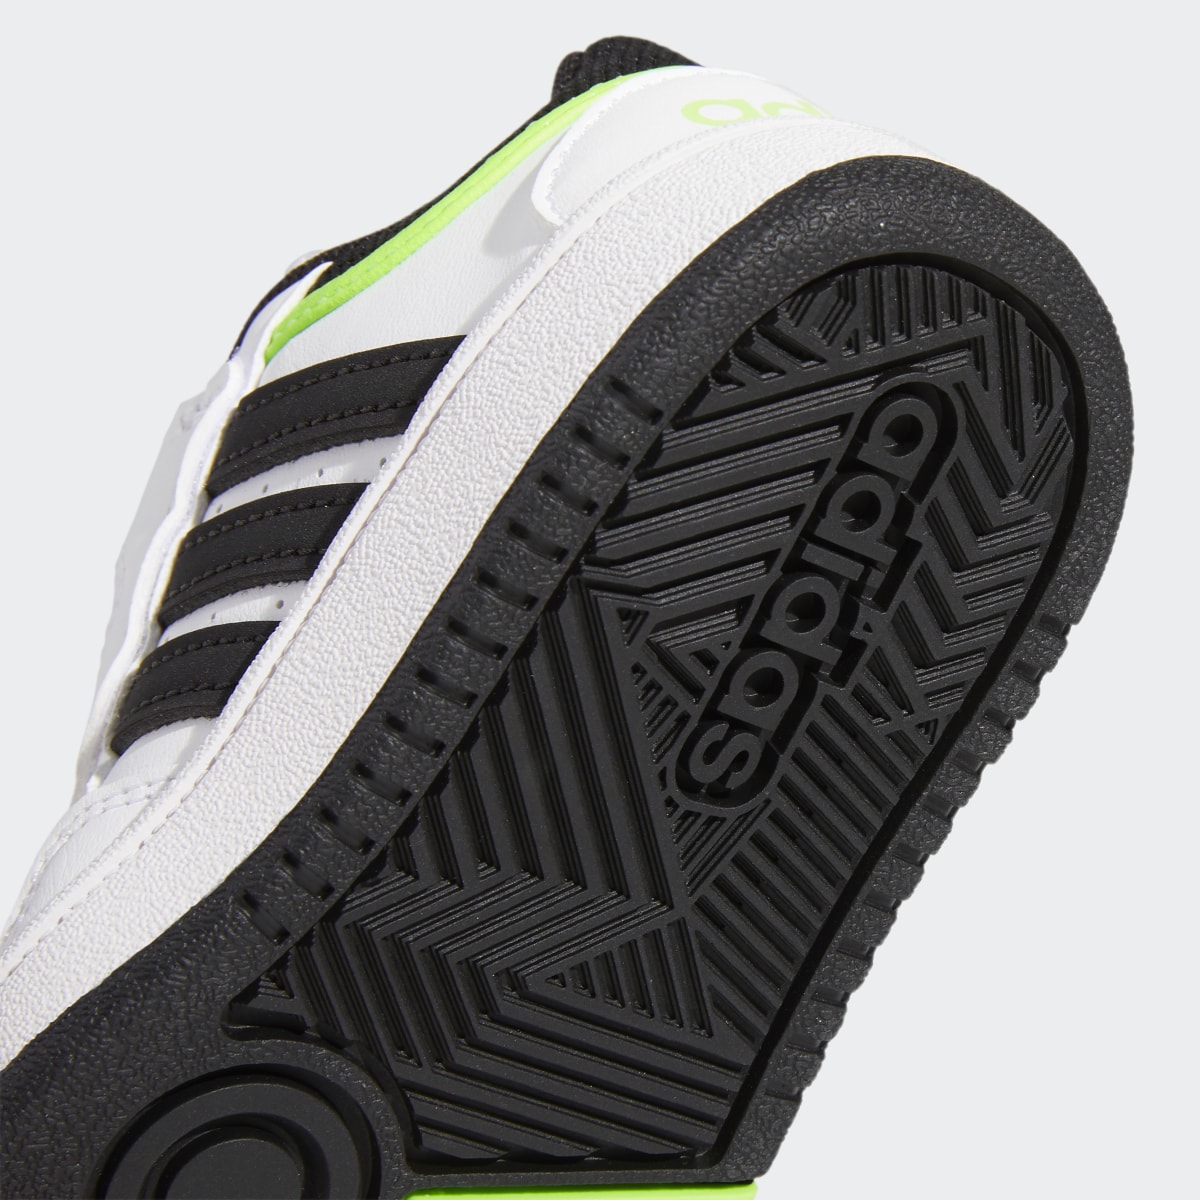 Adidas Hoops Shoes. 10